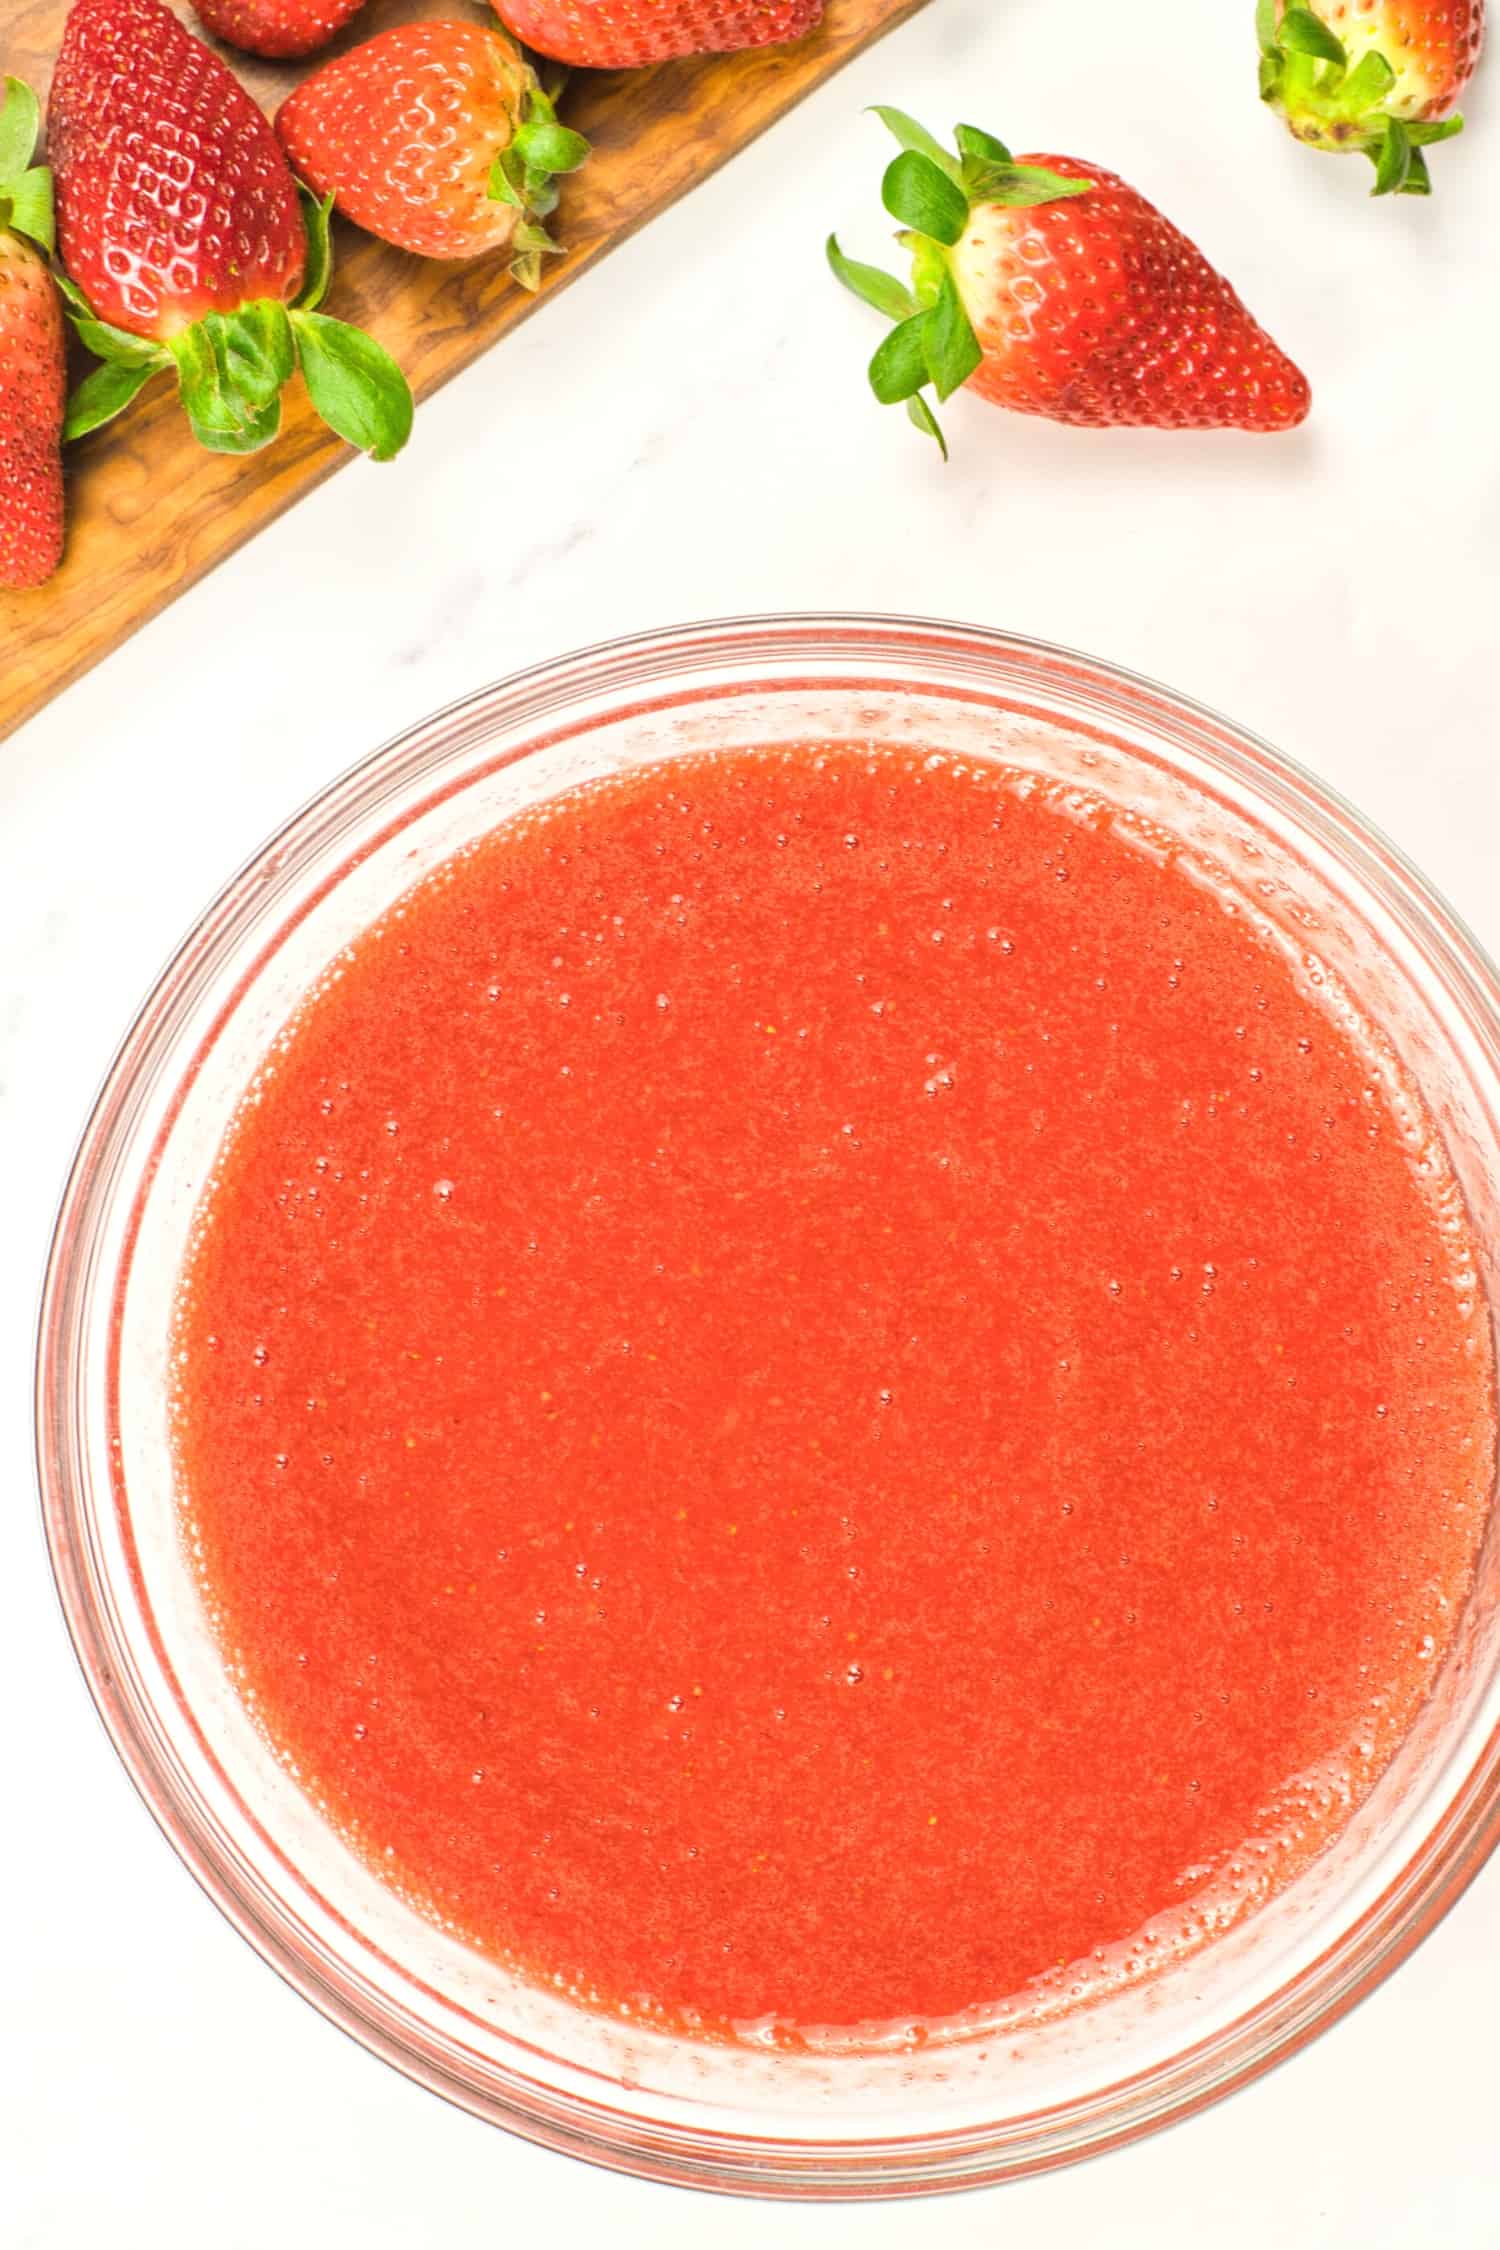 Strawberry sauce in a glass bowl.